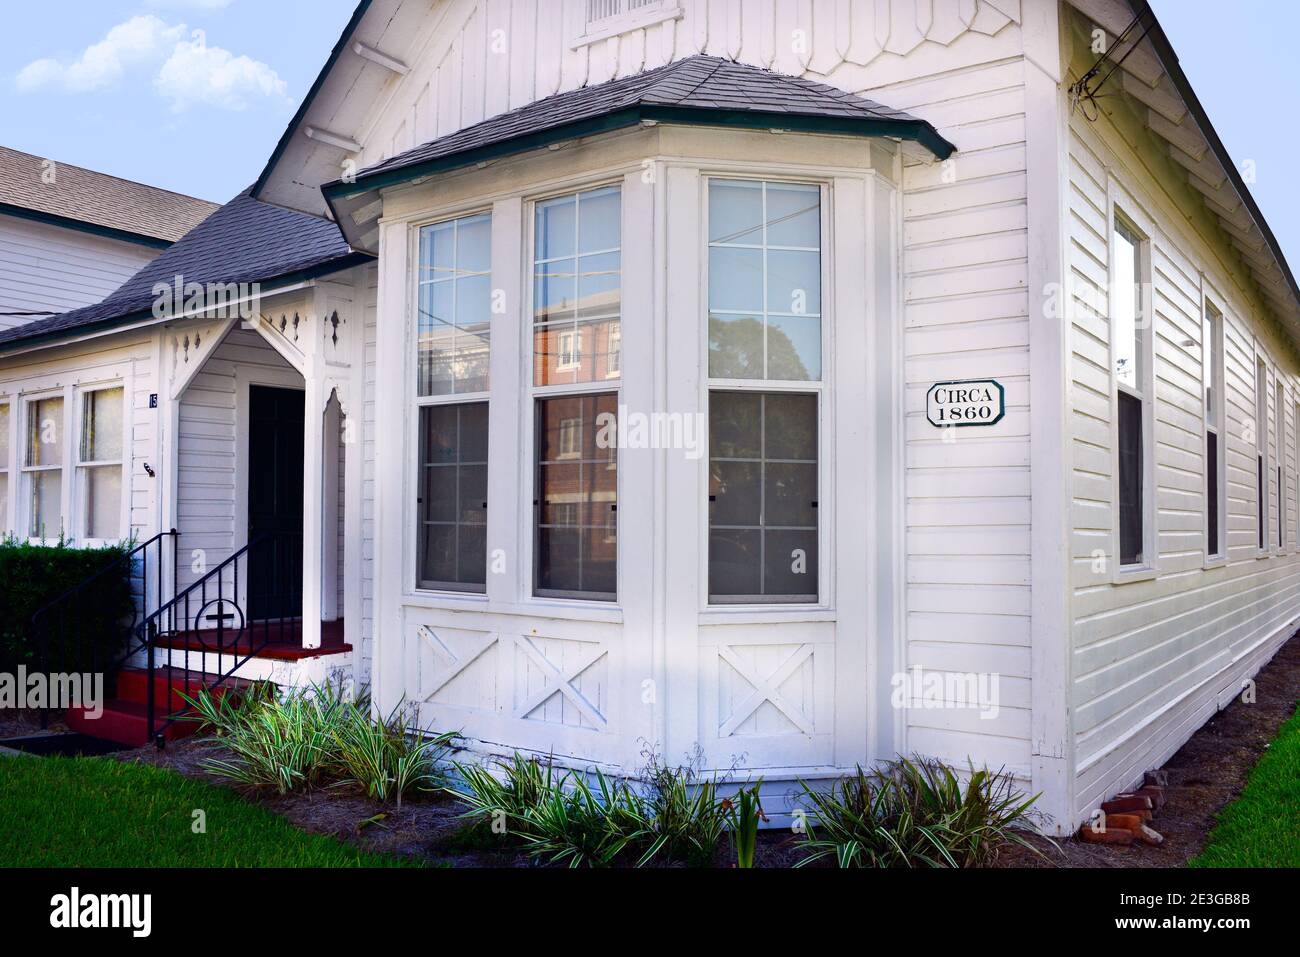 Historical wooden building made in an old Florida craftsman style with religious overtones, and marked with sign: circa 1860, in Fernandina Beach, FL Stock Photo